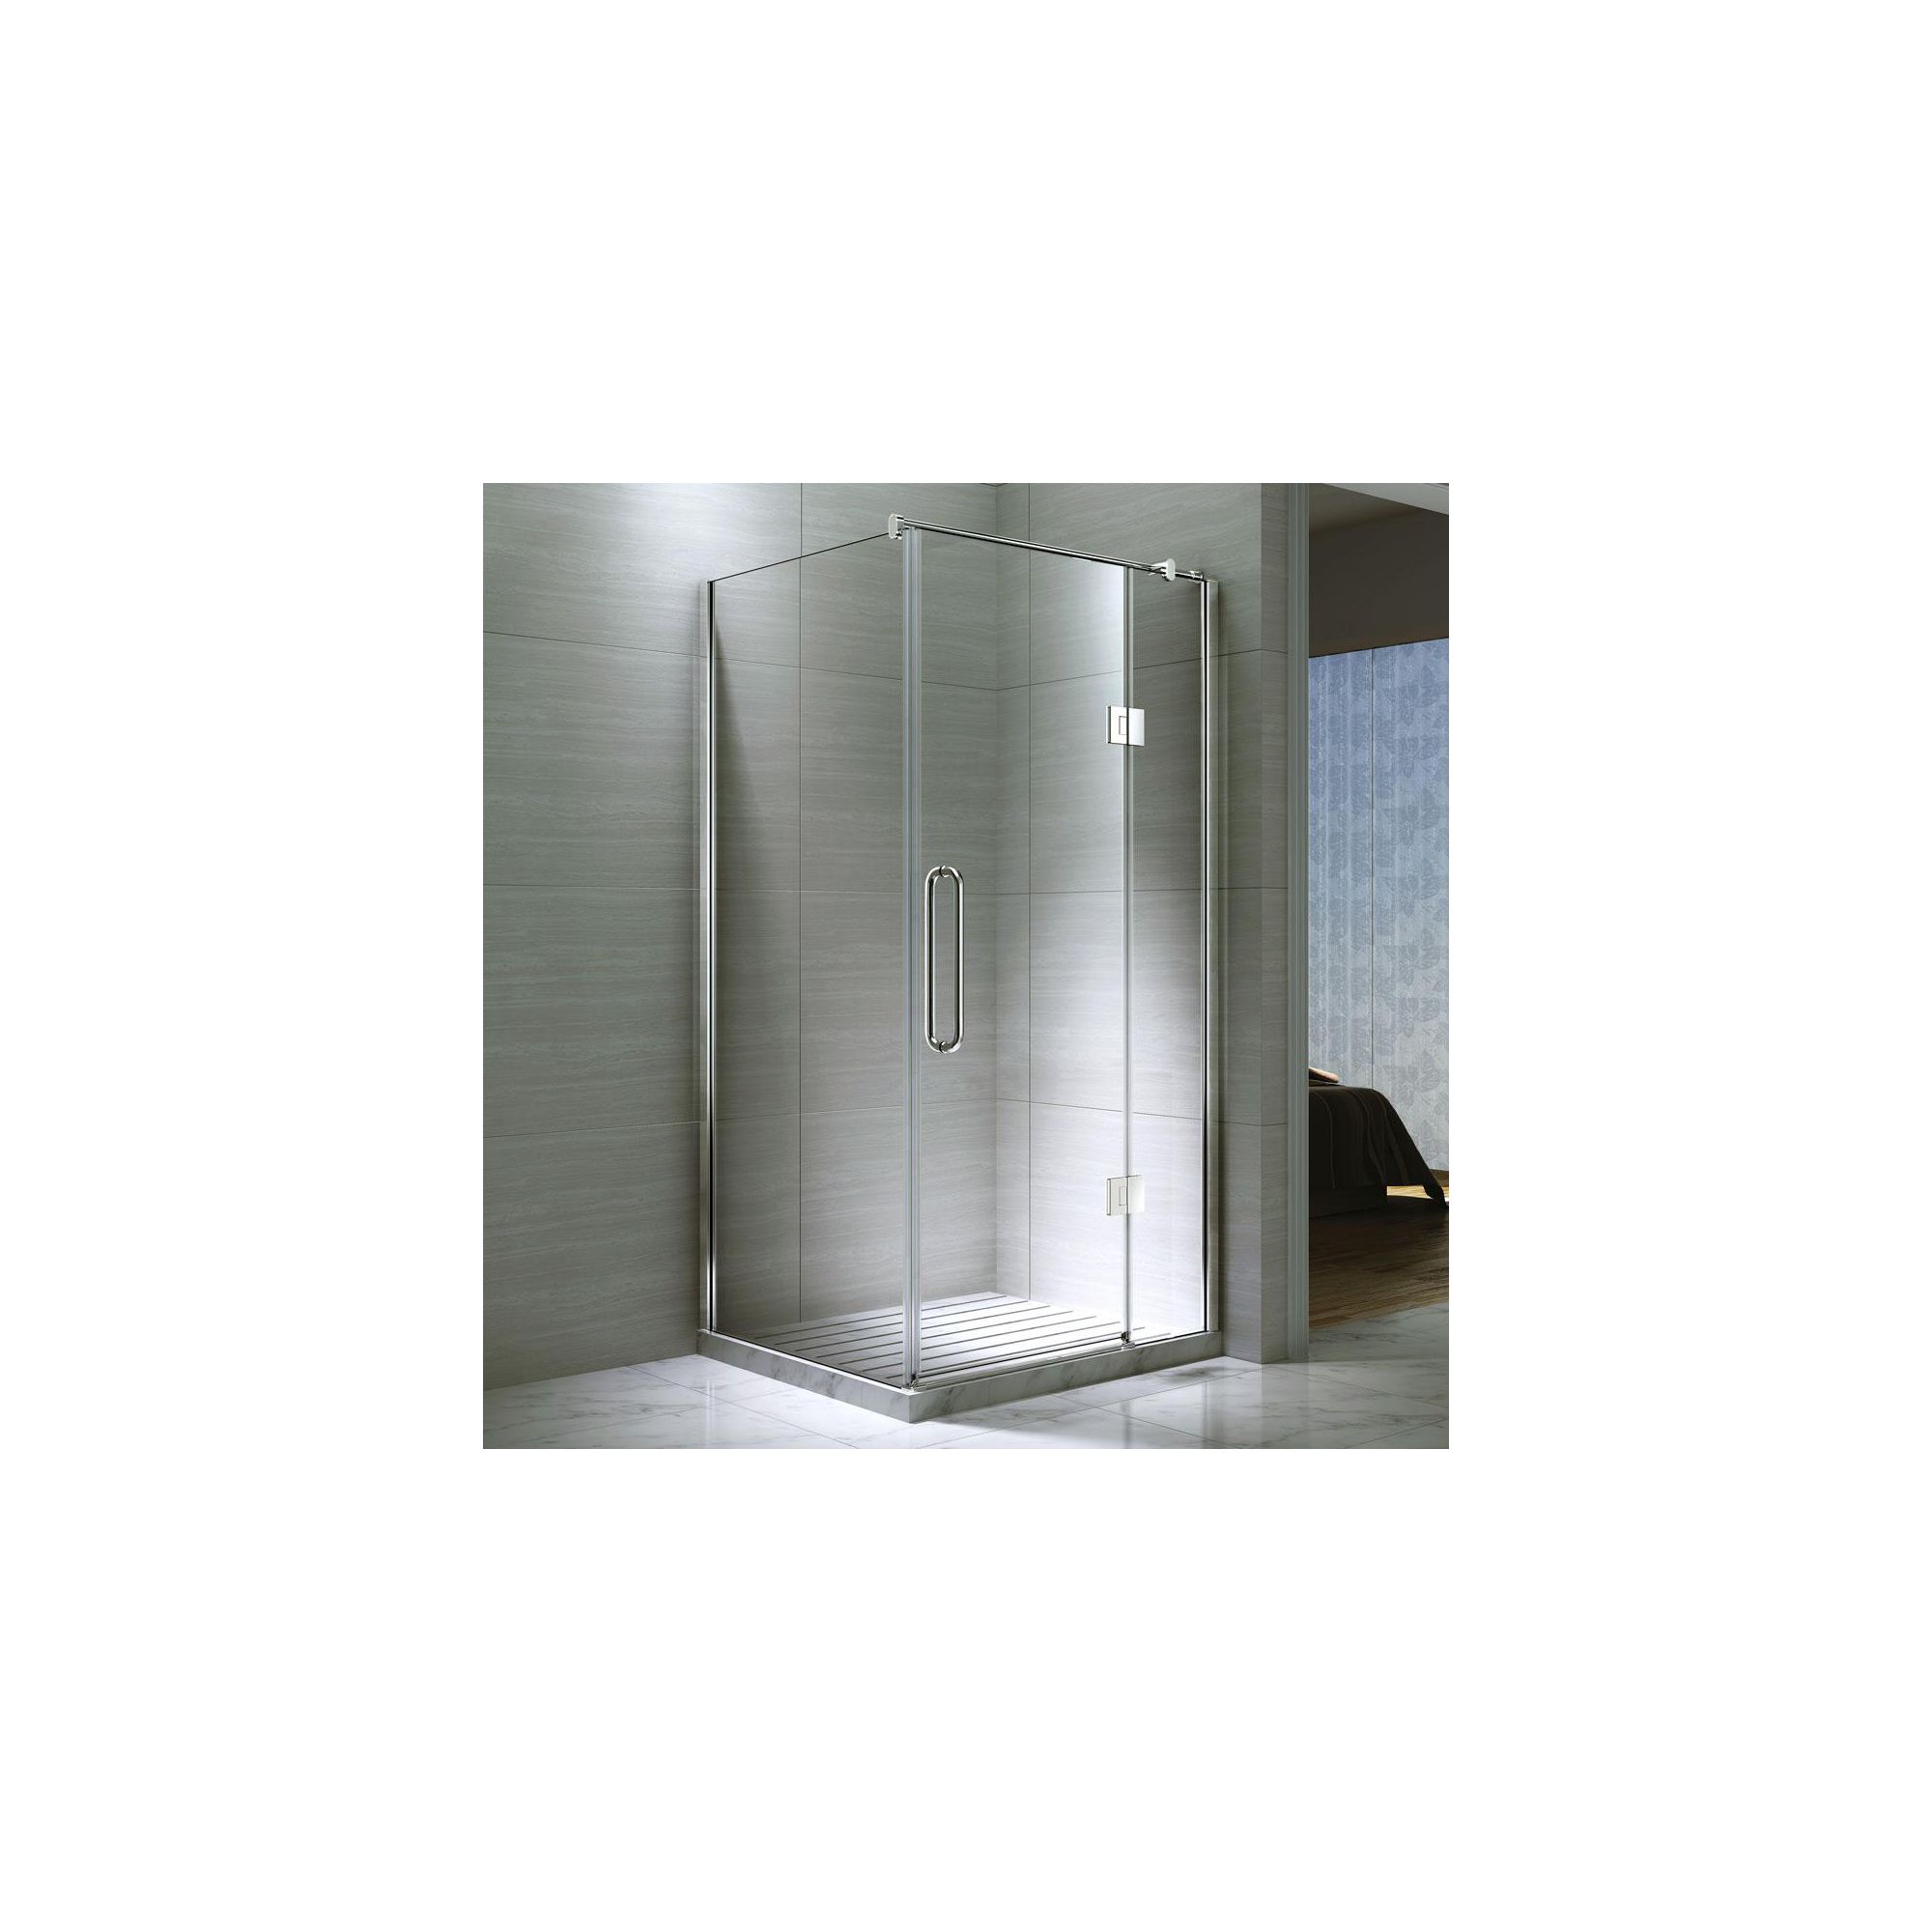 Desire Ten Hinged Shower Door with Side Panel, 1000mm x 800mm, Semi-Frameless, 10mm Glass at Tesco Direct